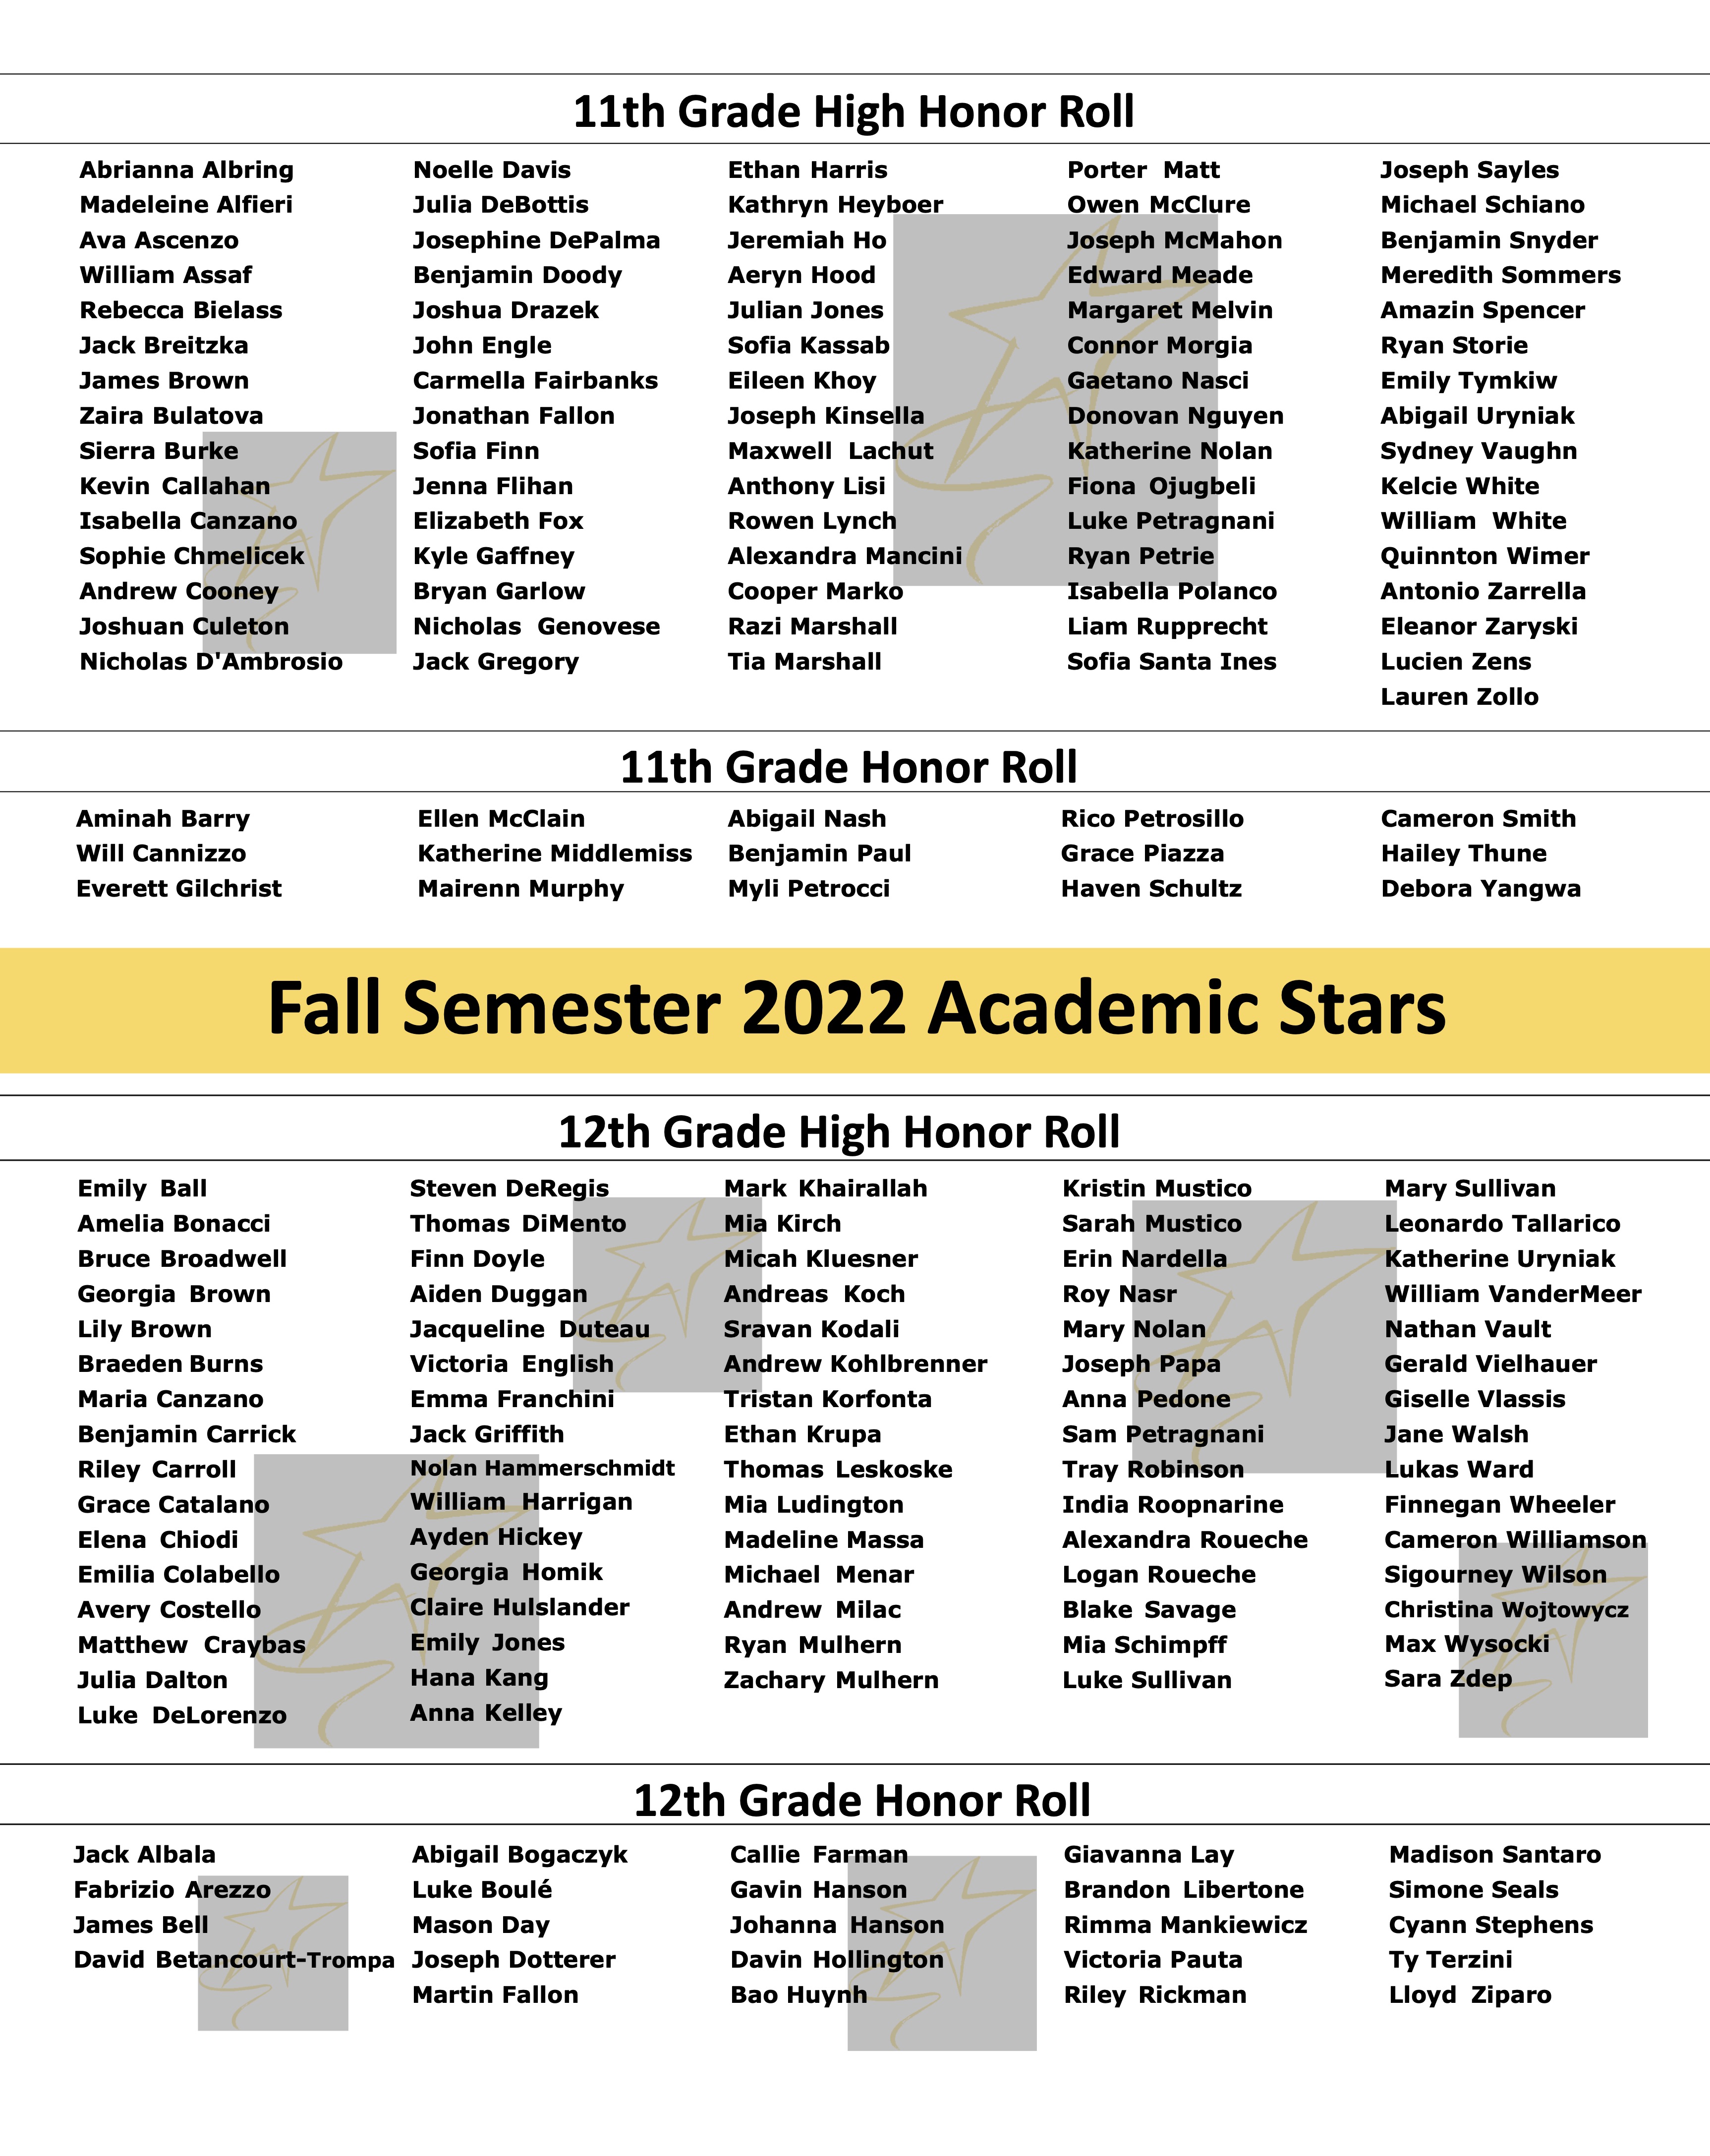 fall semester 2022 honor roll list near syracuse ny image of 11th and 12th grade honor roll and high honor rollstudents